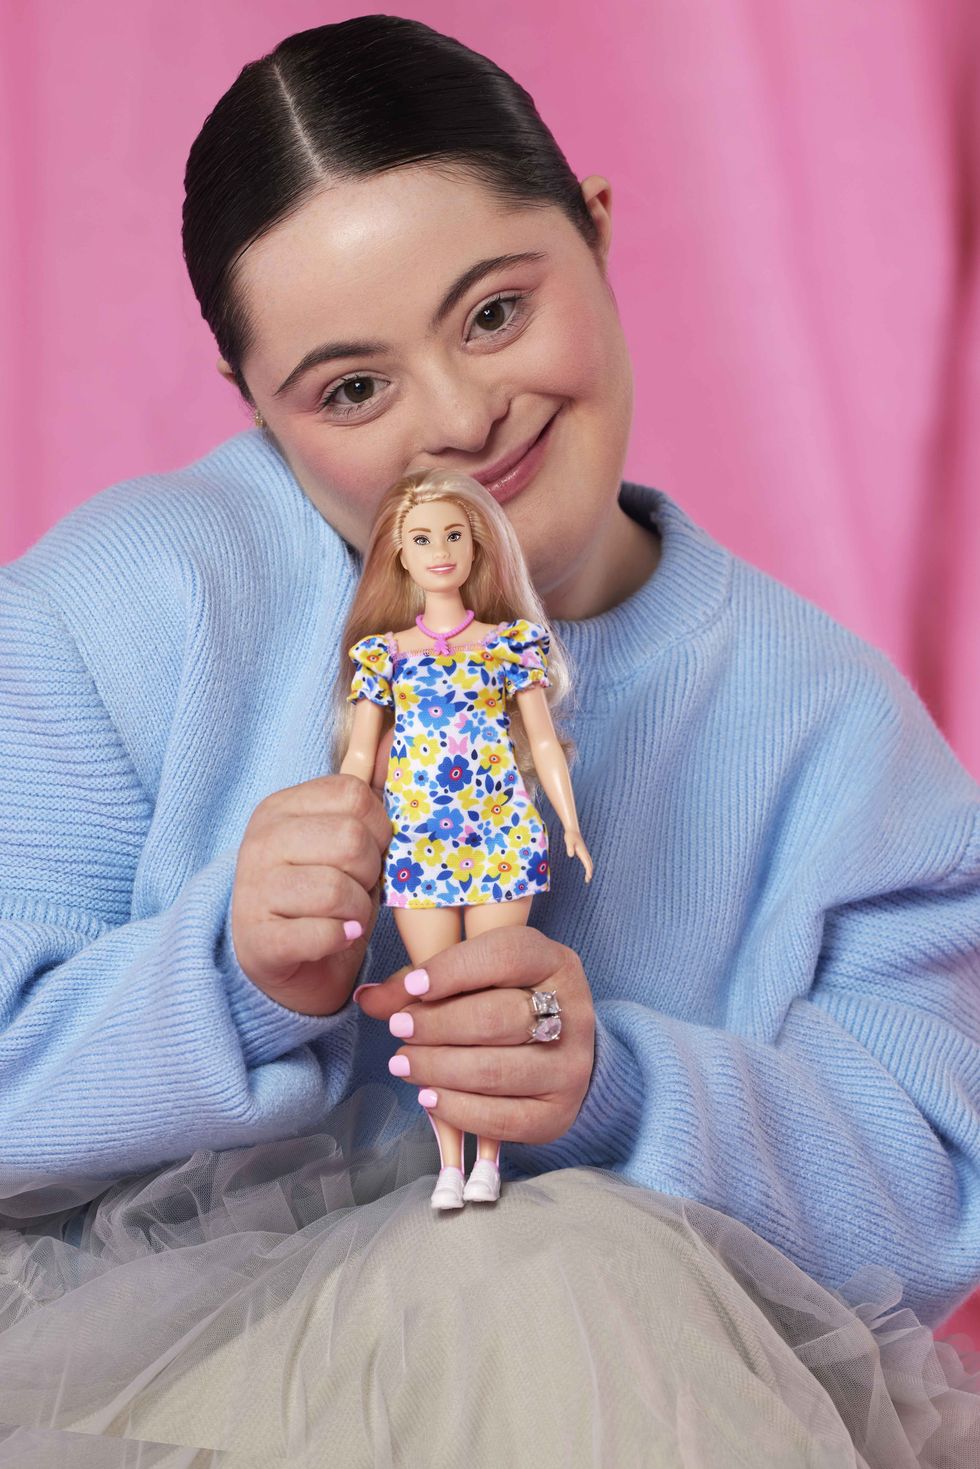 Barbie doll with Down's syndrome launched by Mattel